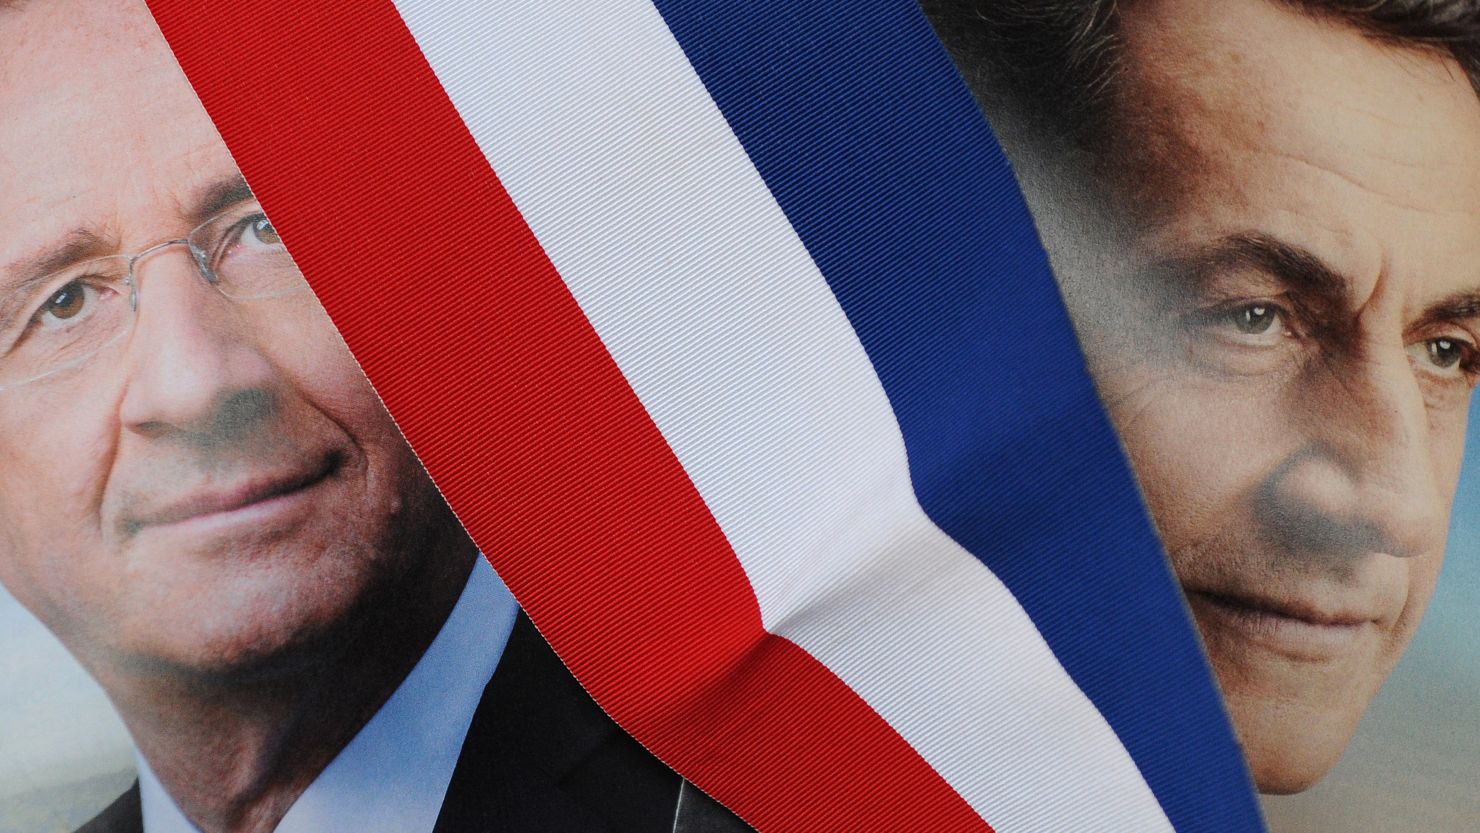 Francois Hollande and Nicolas Sarkozy face a run-off vote for the presidency on May 6.